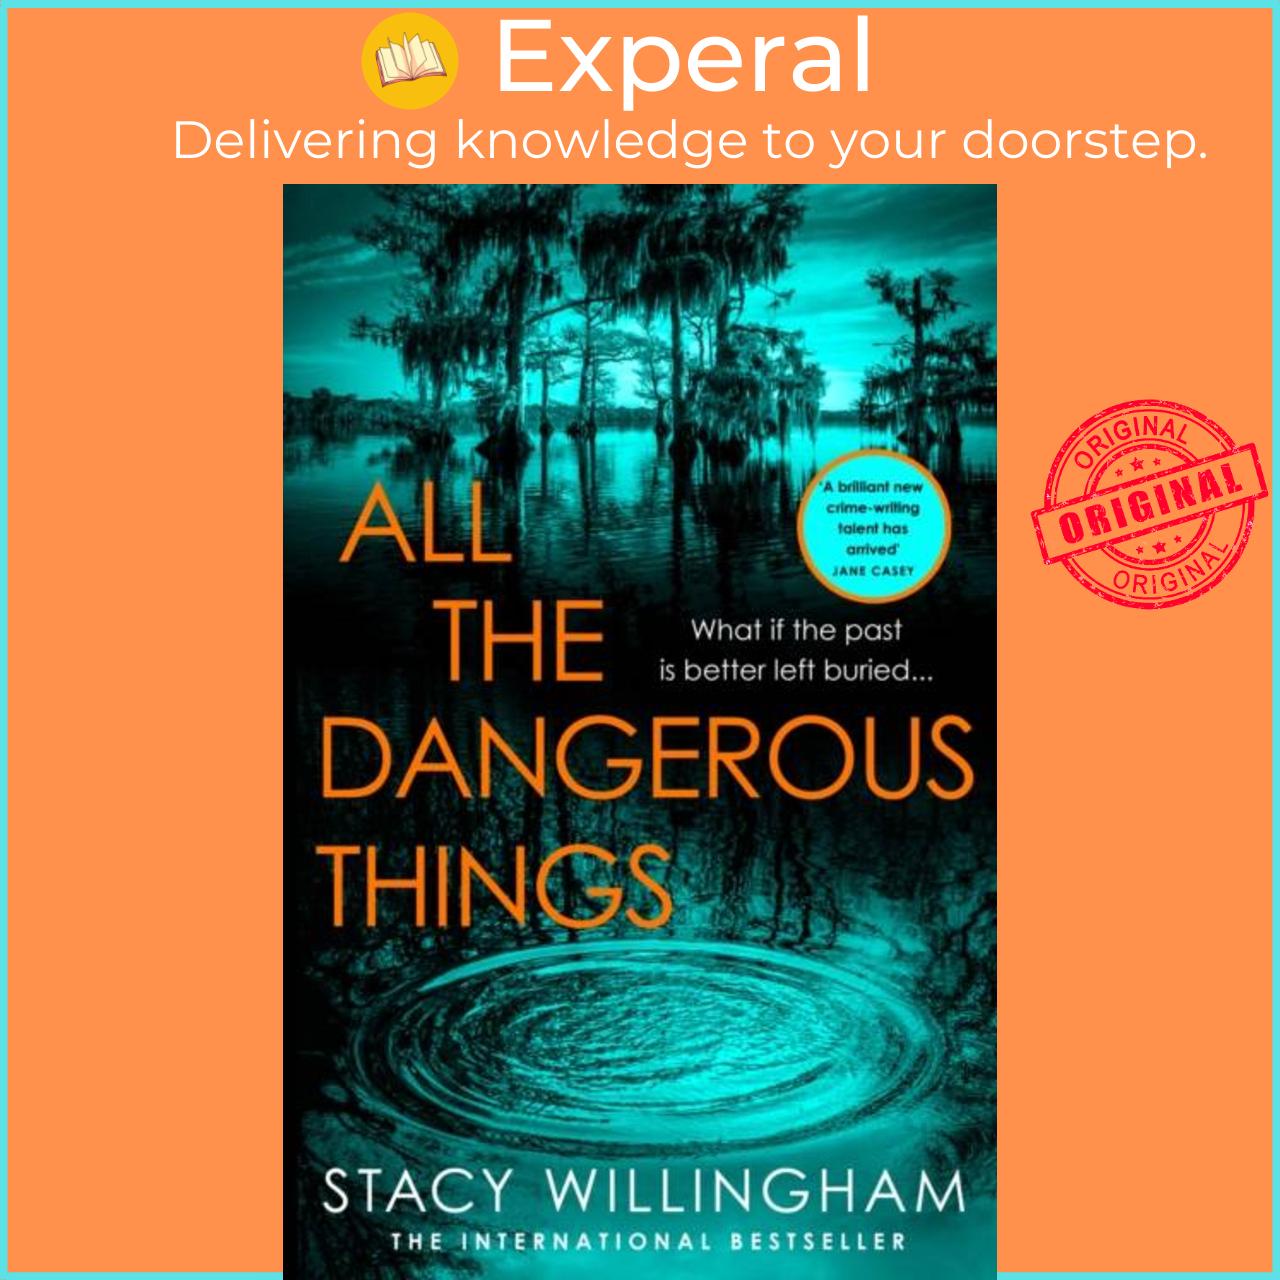 Sách - All the Dangerous Things by Stacy Willingham (UK edition, hardcover)